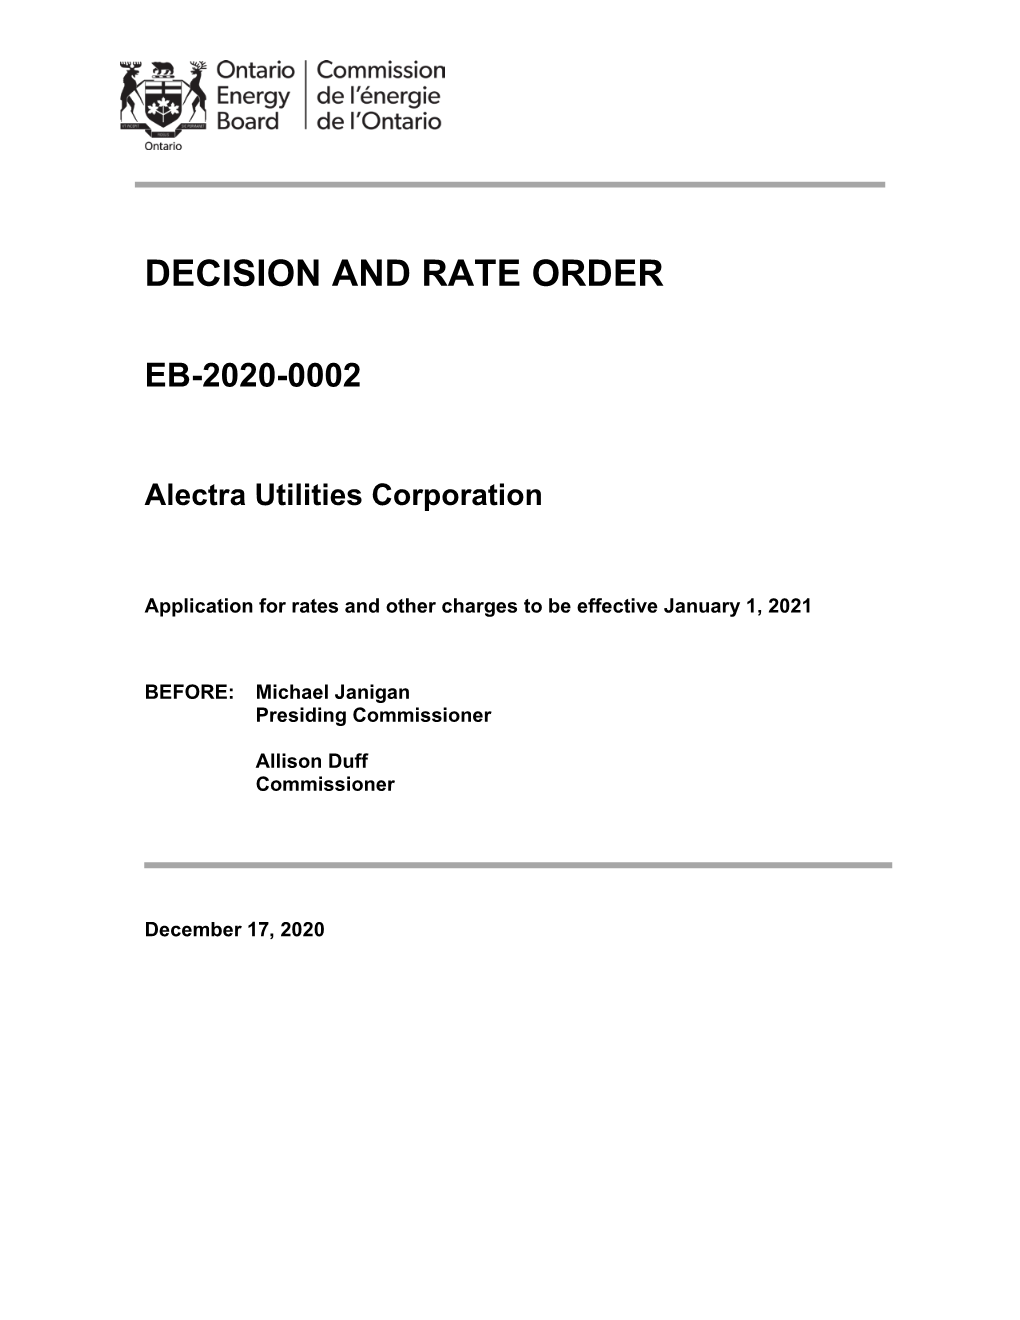 Decision and Rate Order for Alectra 2021